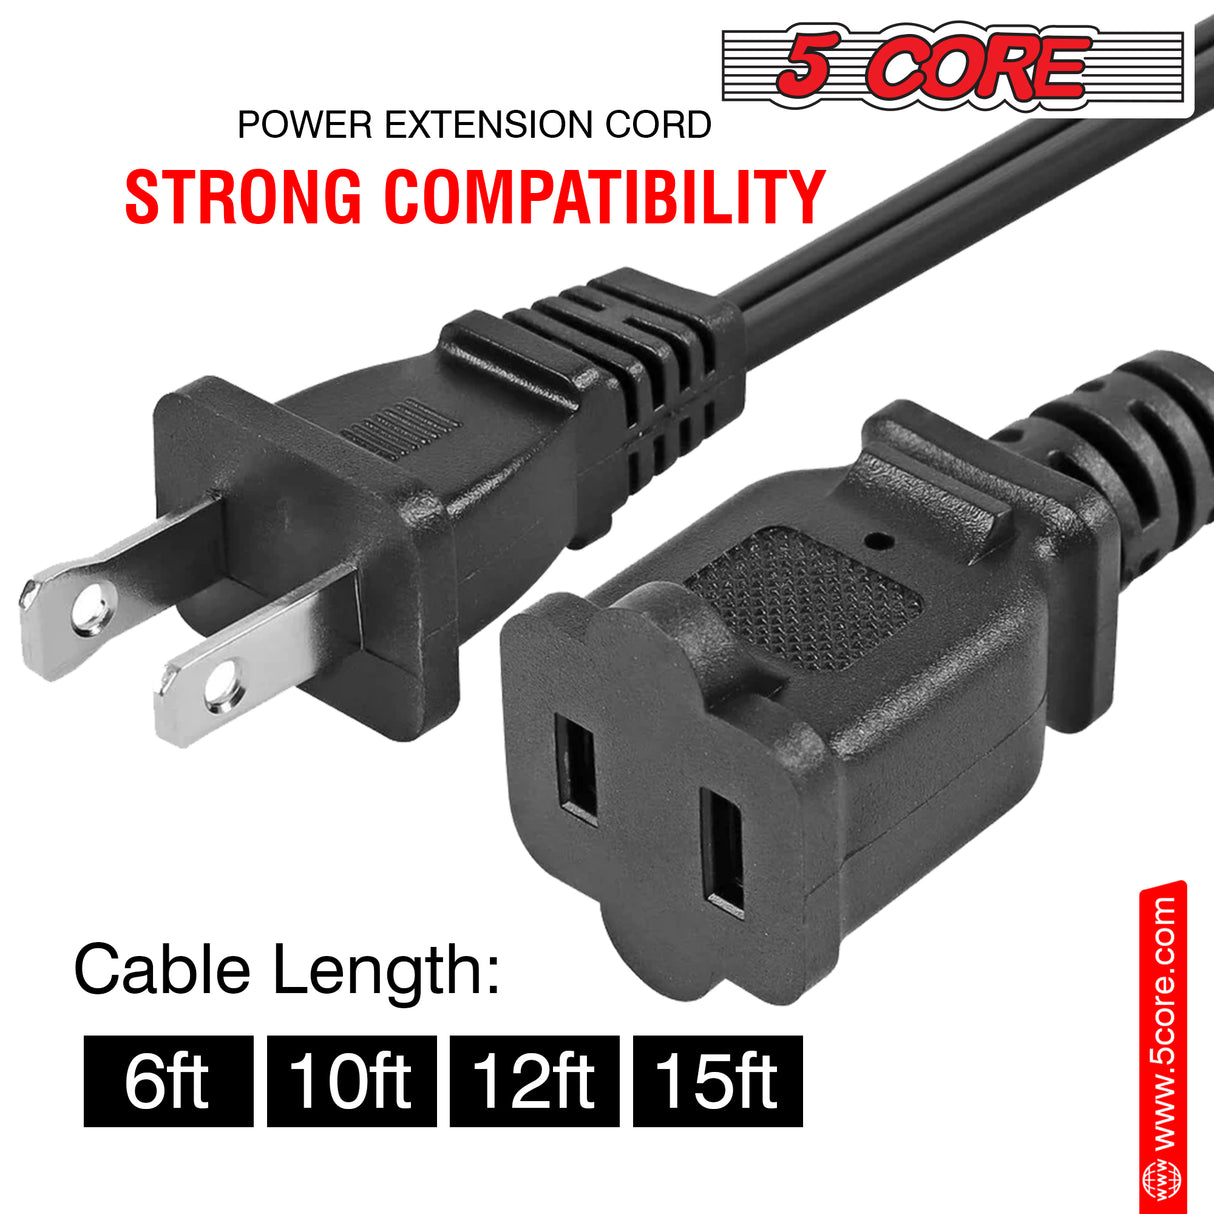 5 Core 2-Prong Male-Female Extension Power Cord Cable, Outlet Extension Cable Cord US AC 2-Prong Male-Female Power Cable 13A/125V, Black EXC BLK 6FT